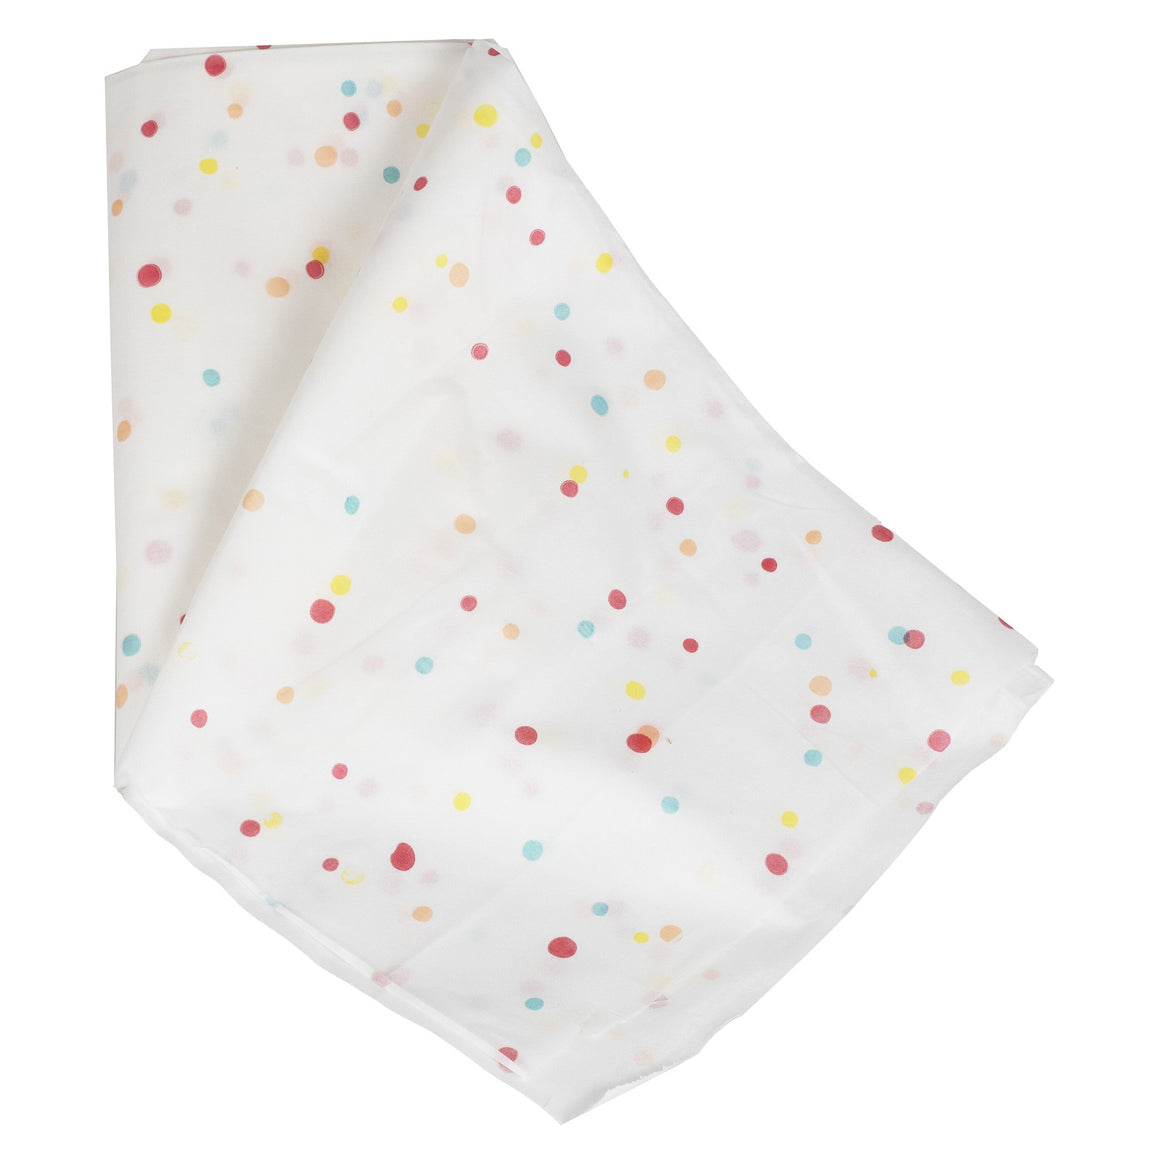 TABLECOVER PAPER - BRIGHT DOTS